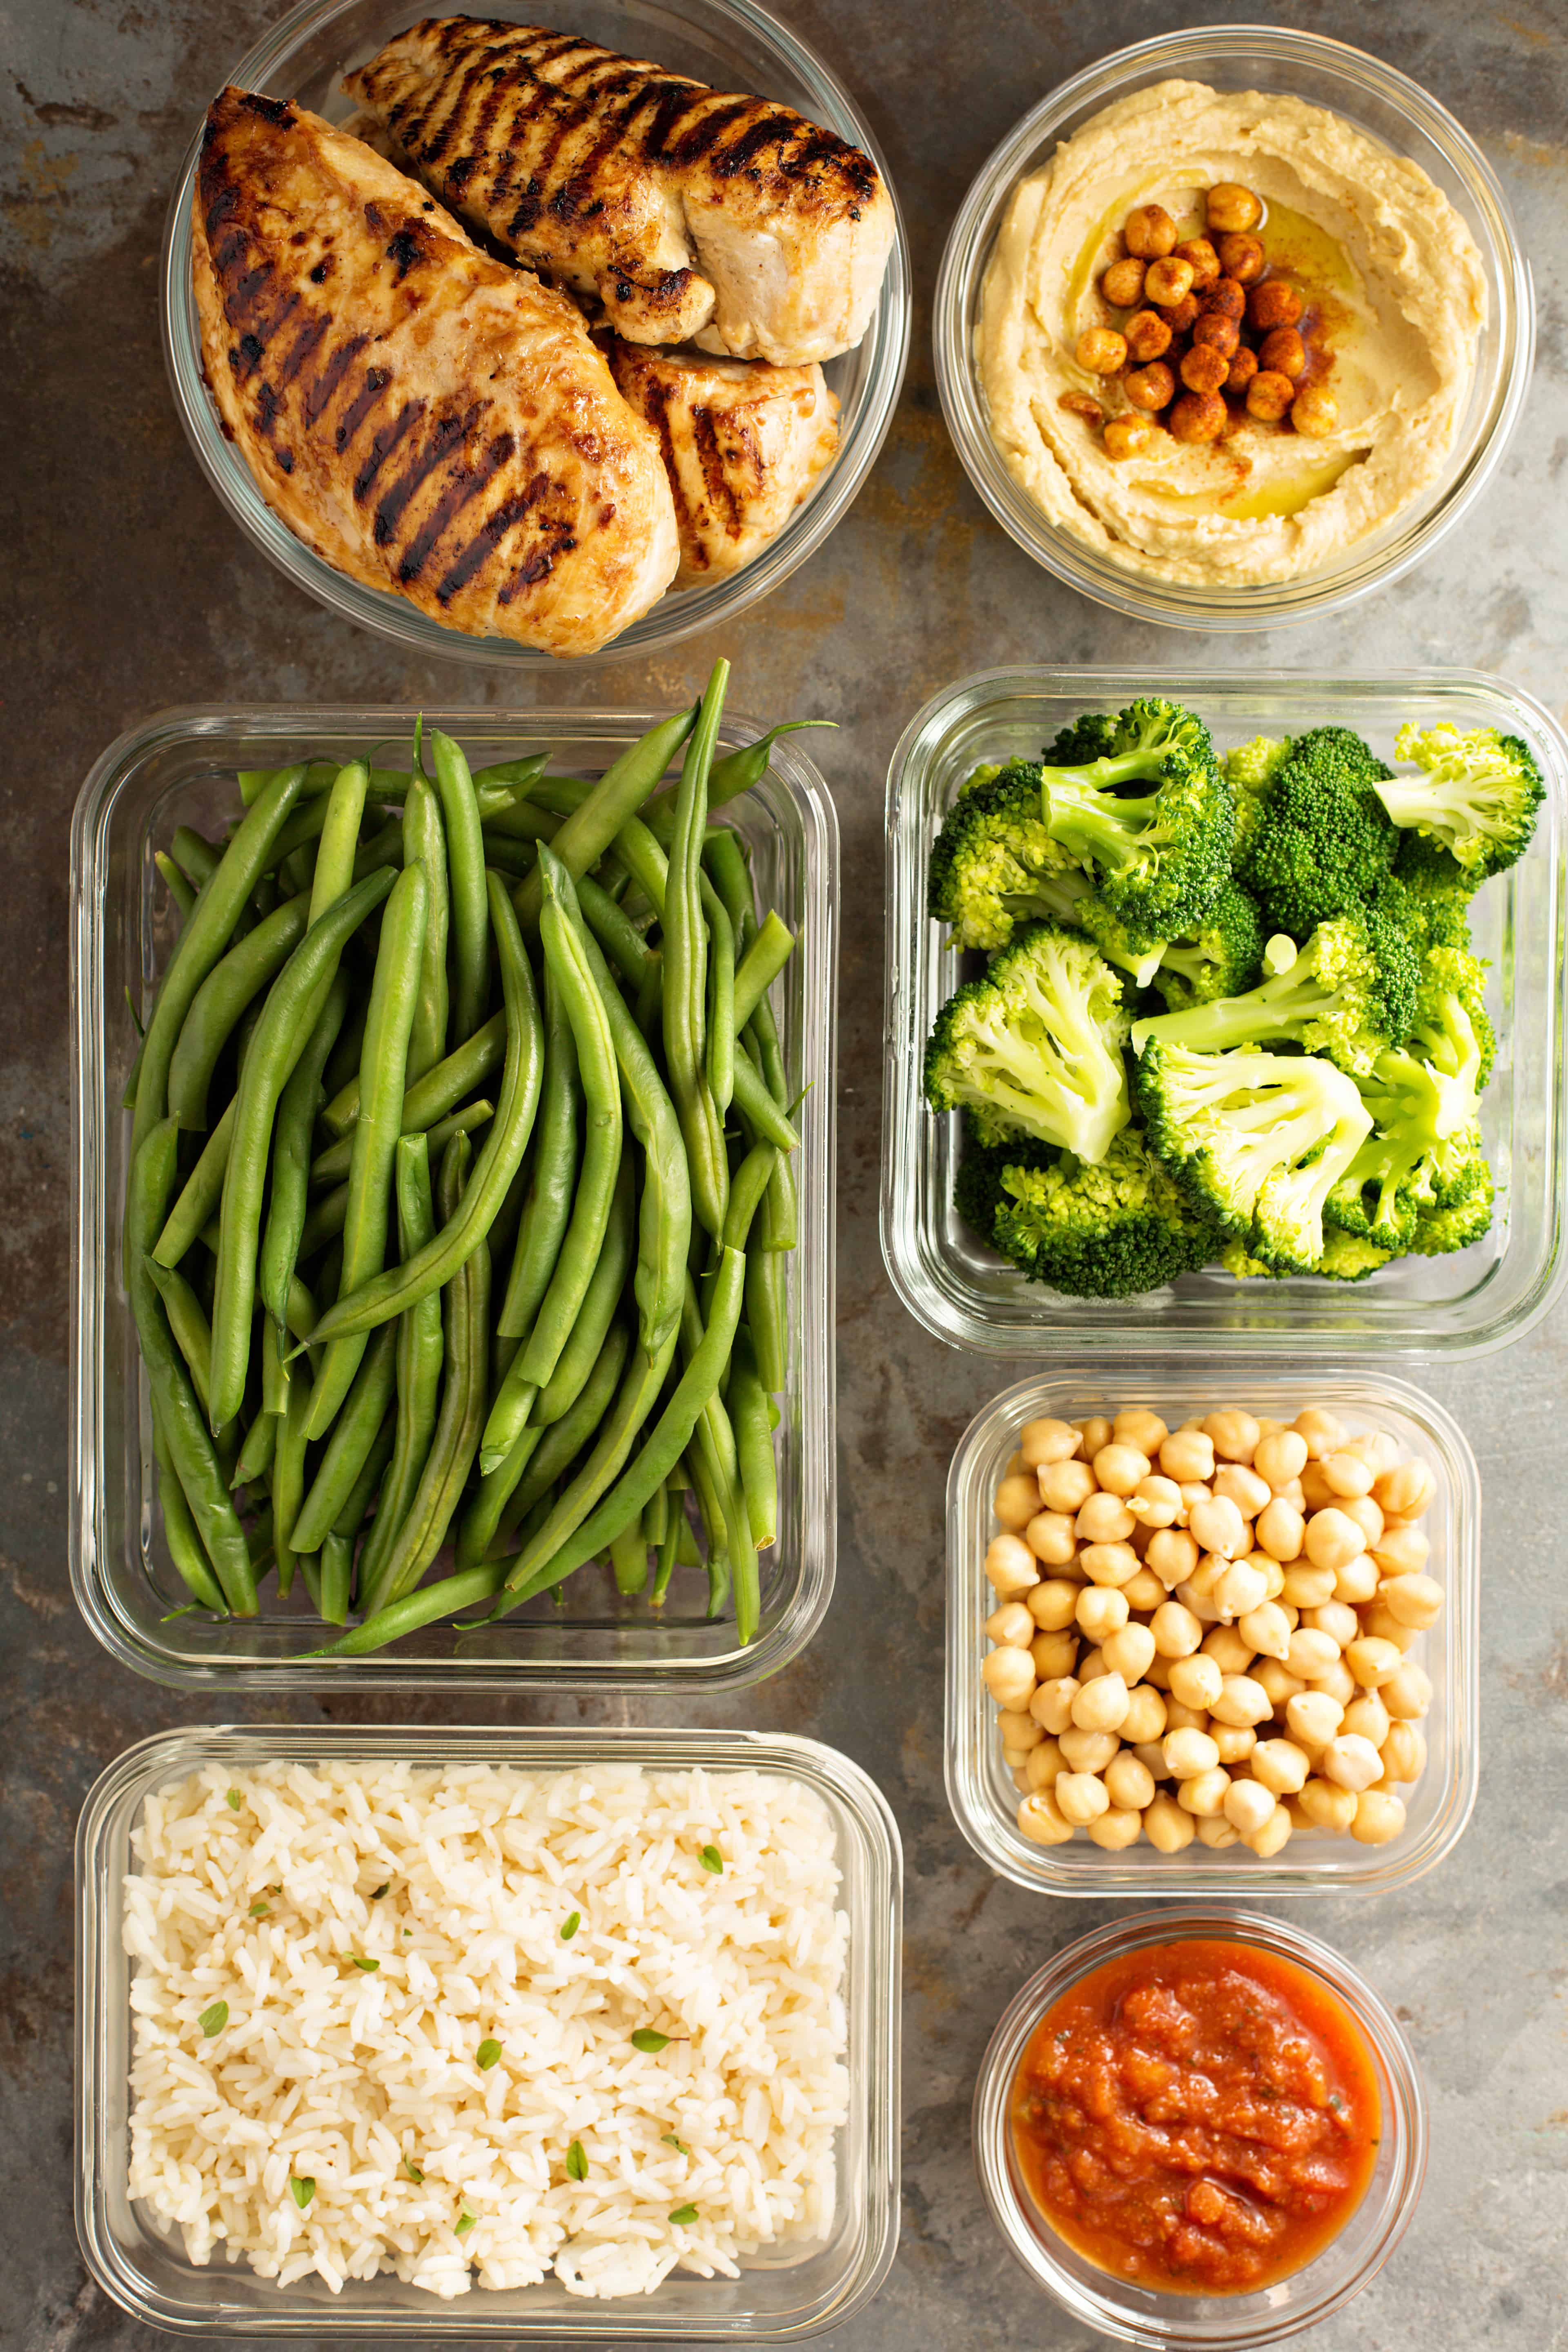 Meal Prep Ideas And Guide For Busy Mums